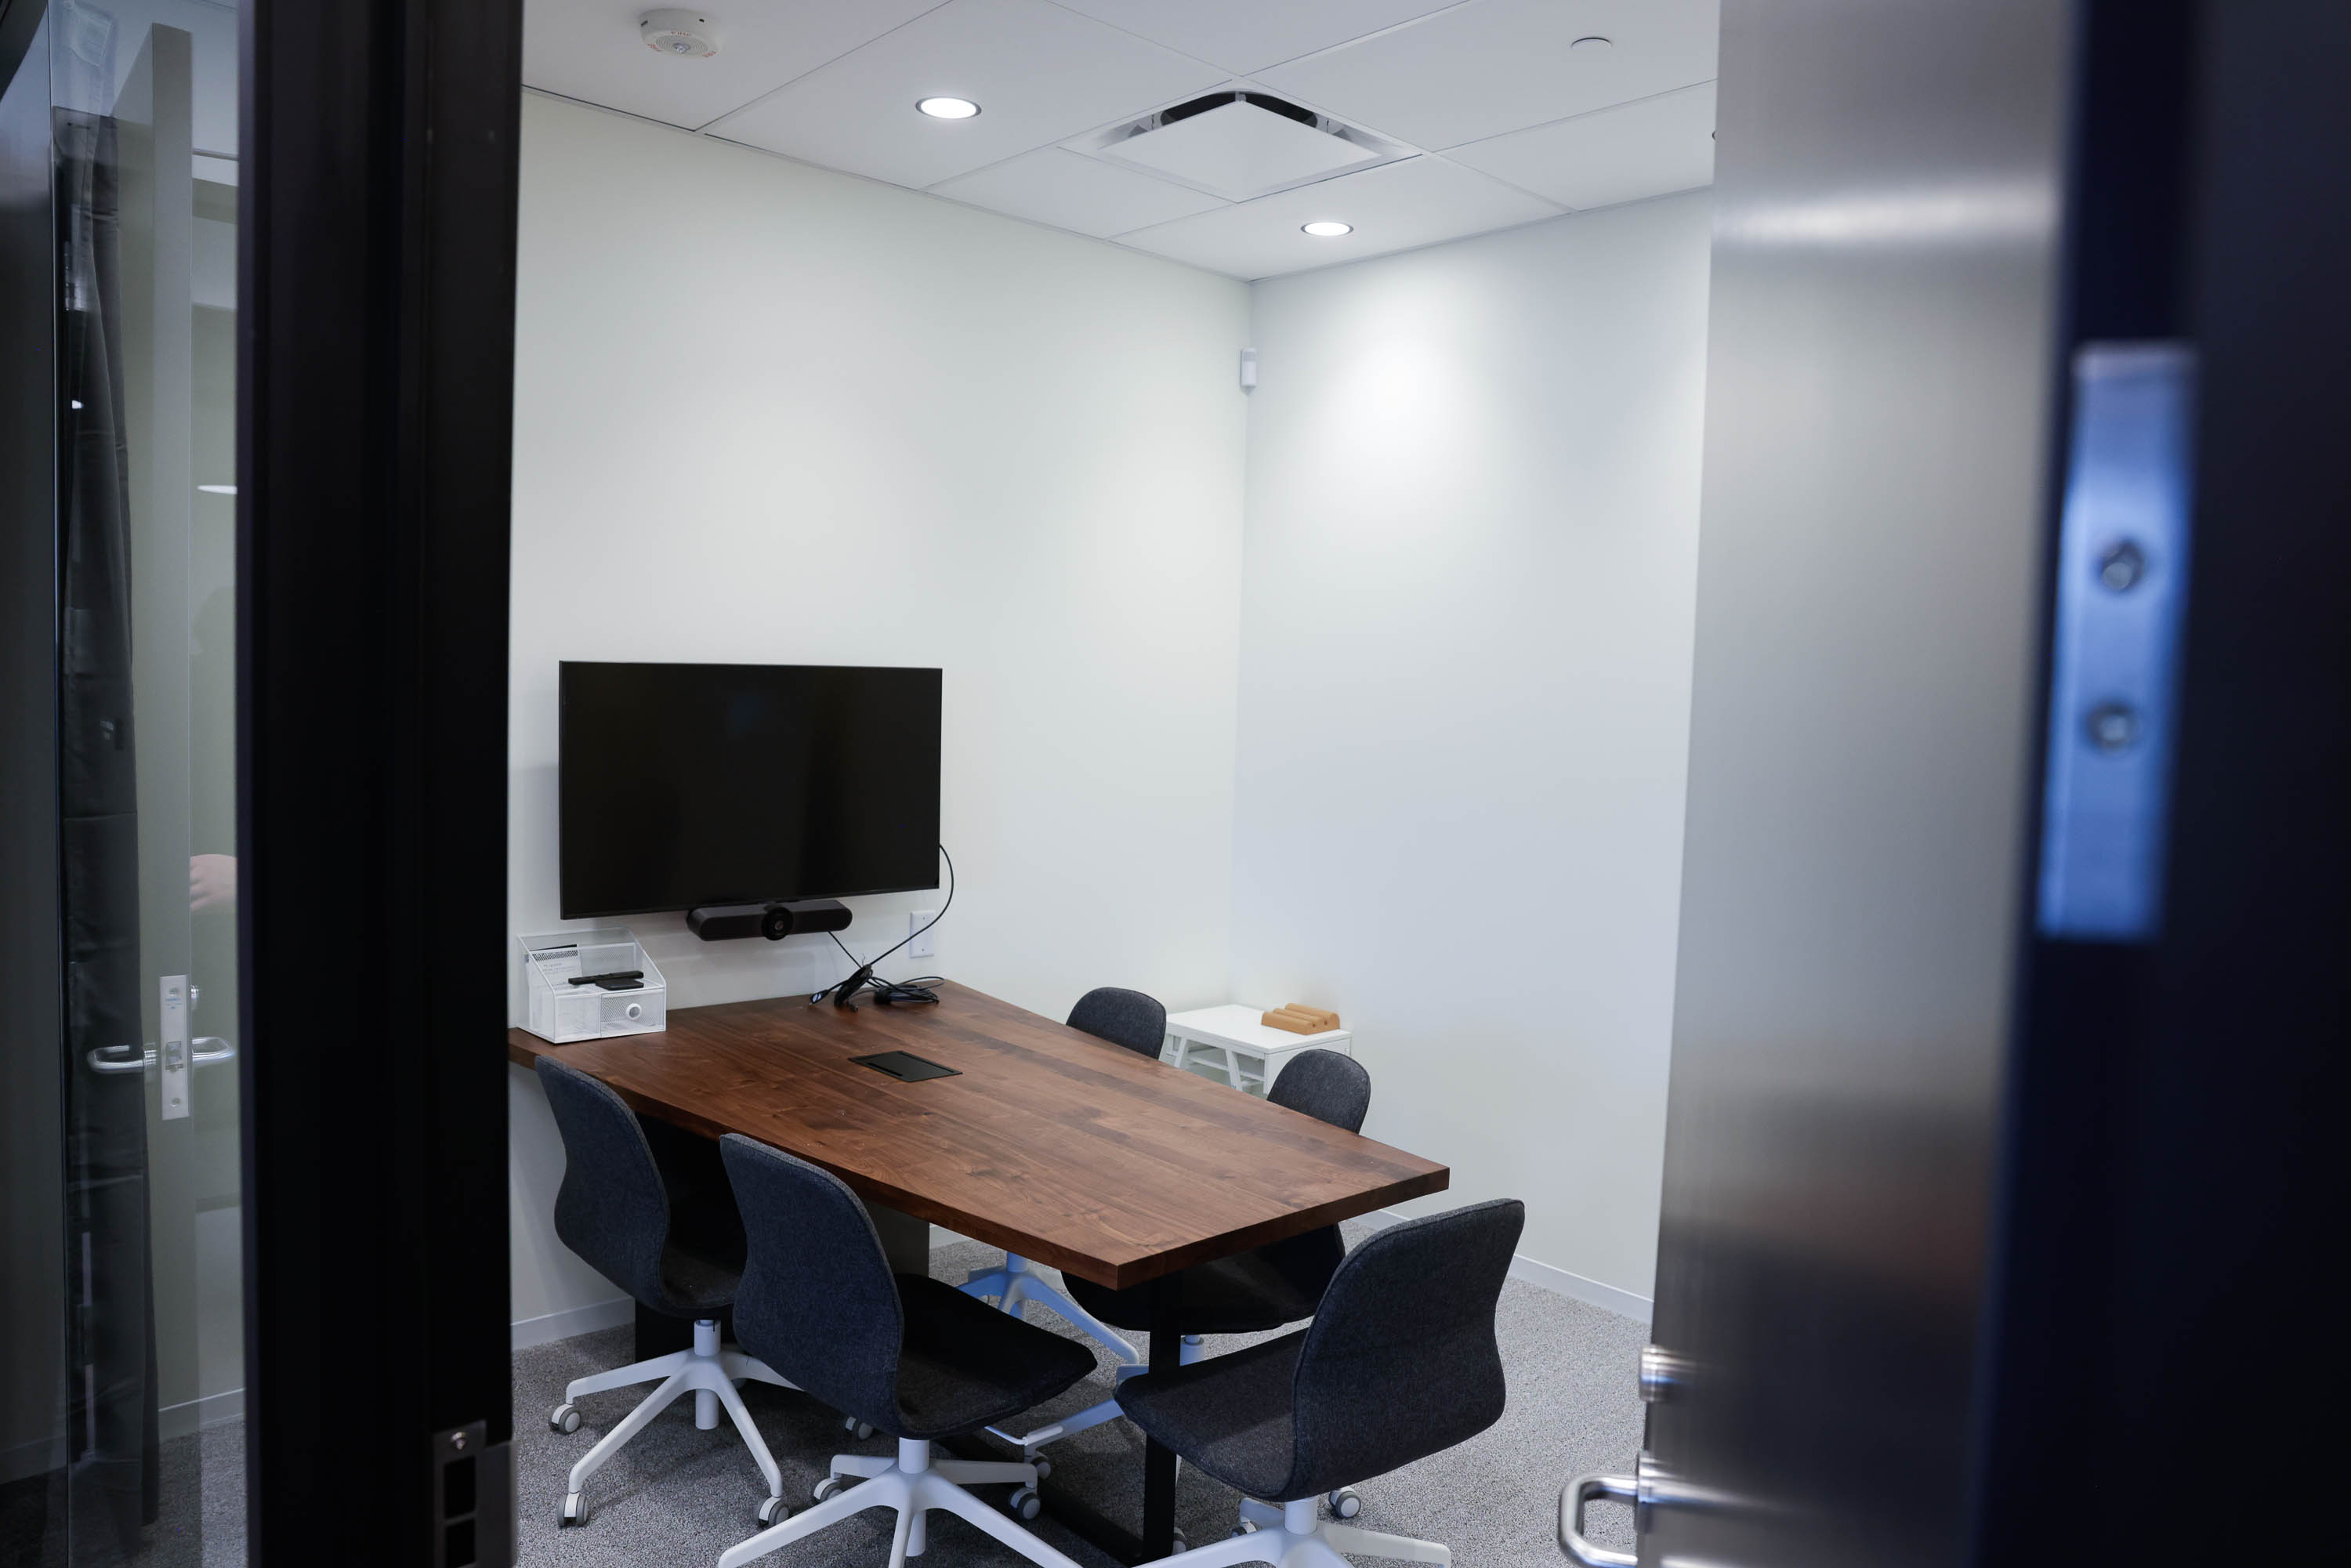 A modern conference room with a wooden table, chairs, and a monitor on the wall.